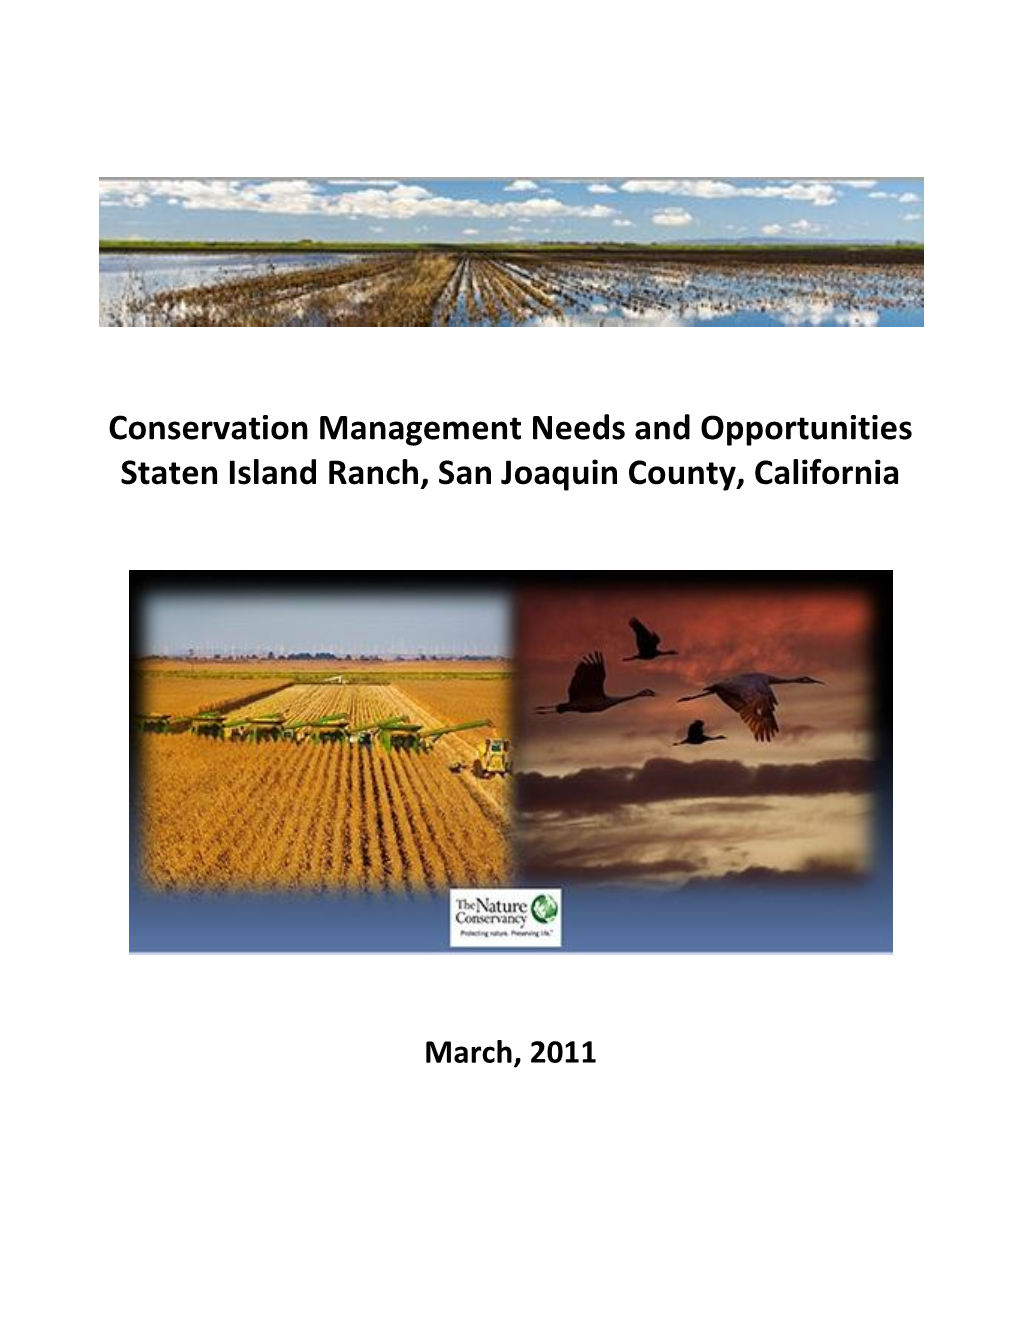 Conservation Needs and Opportunities at Staten Island, San Joaquin